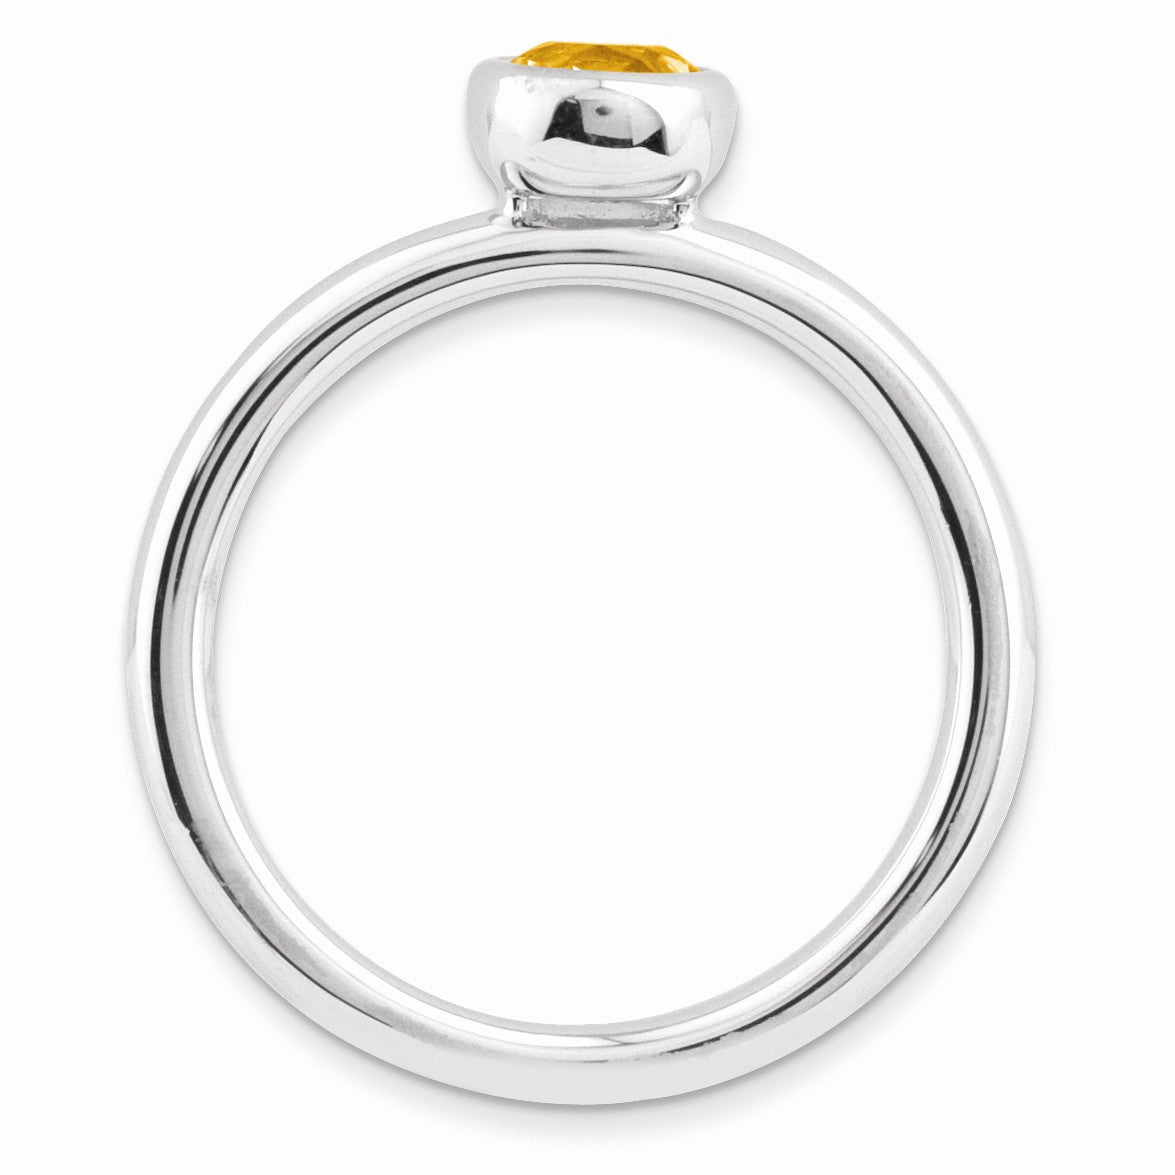 Alternate view of the Stackable Low Profile 5mm Citrine Silver Ring by The Black Bow Jewelry Co.